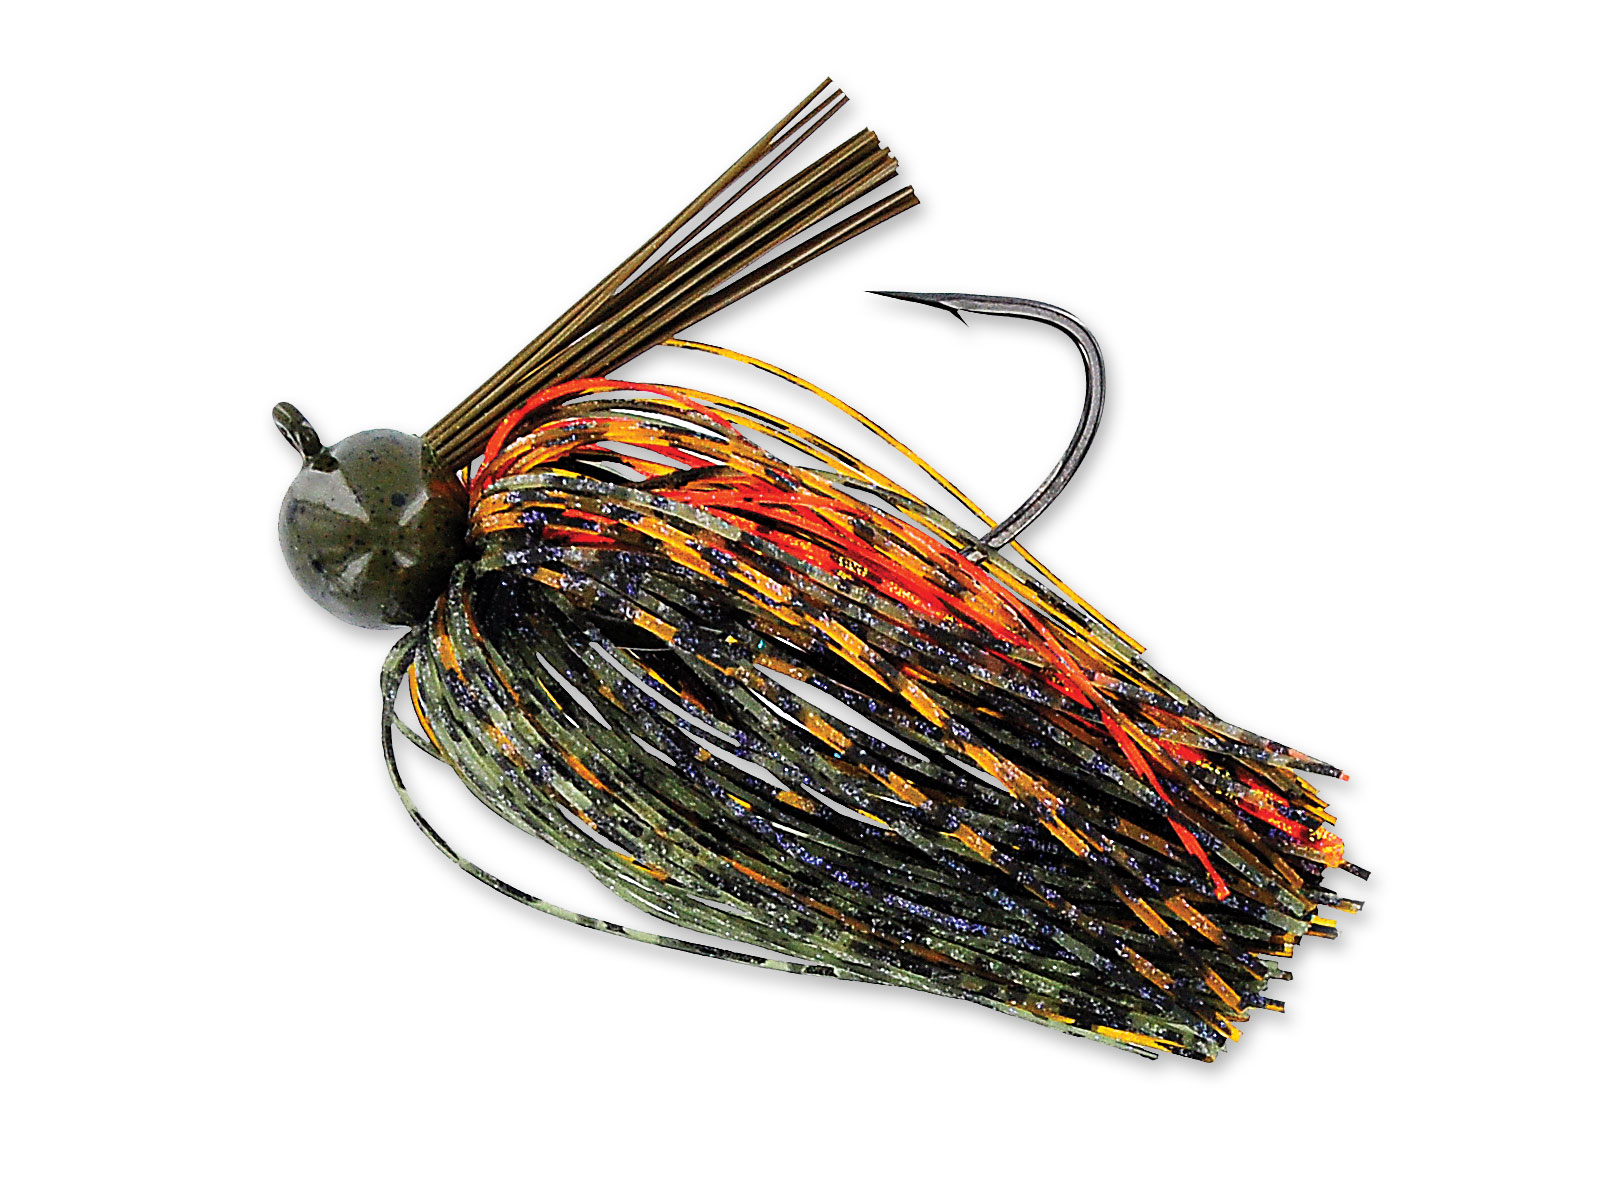 How To Fish A Football Jig, A Jig Fishing Techniques To, 52% OFF